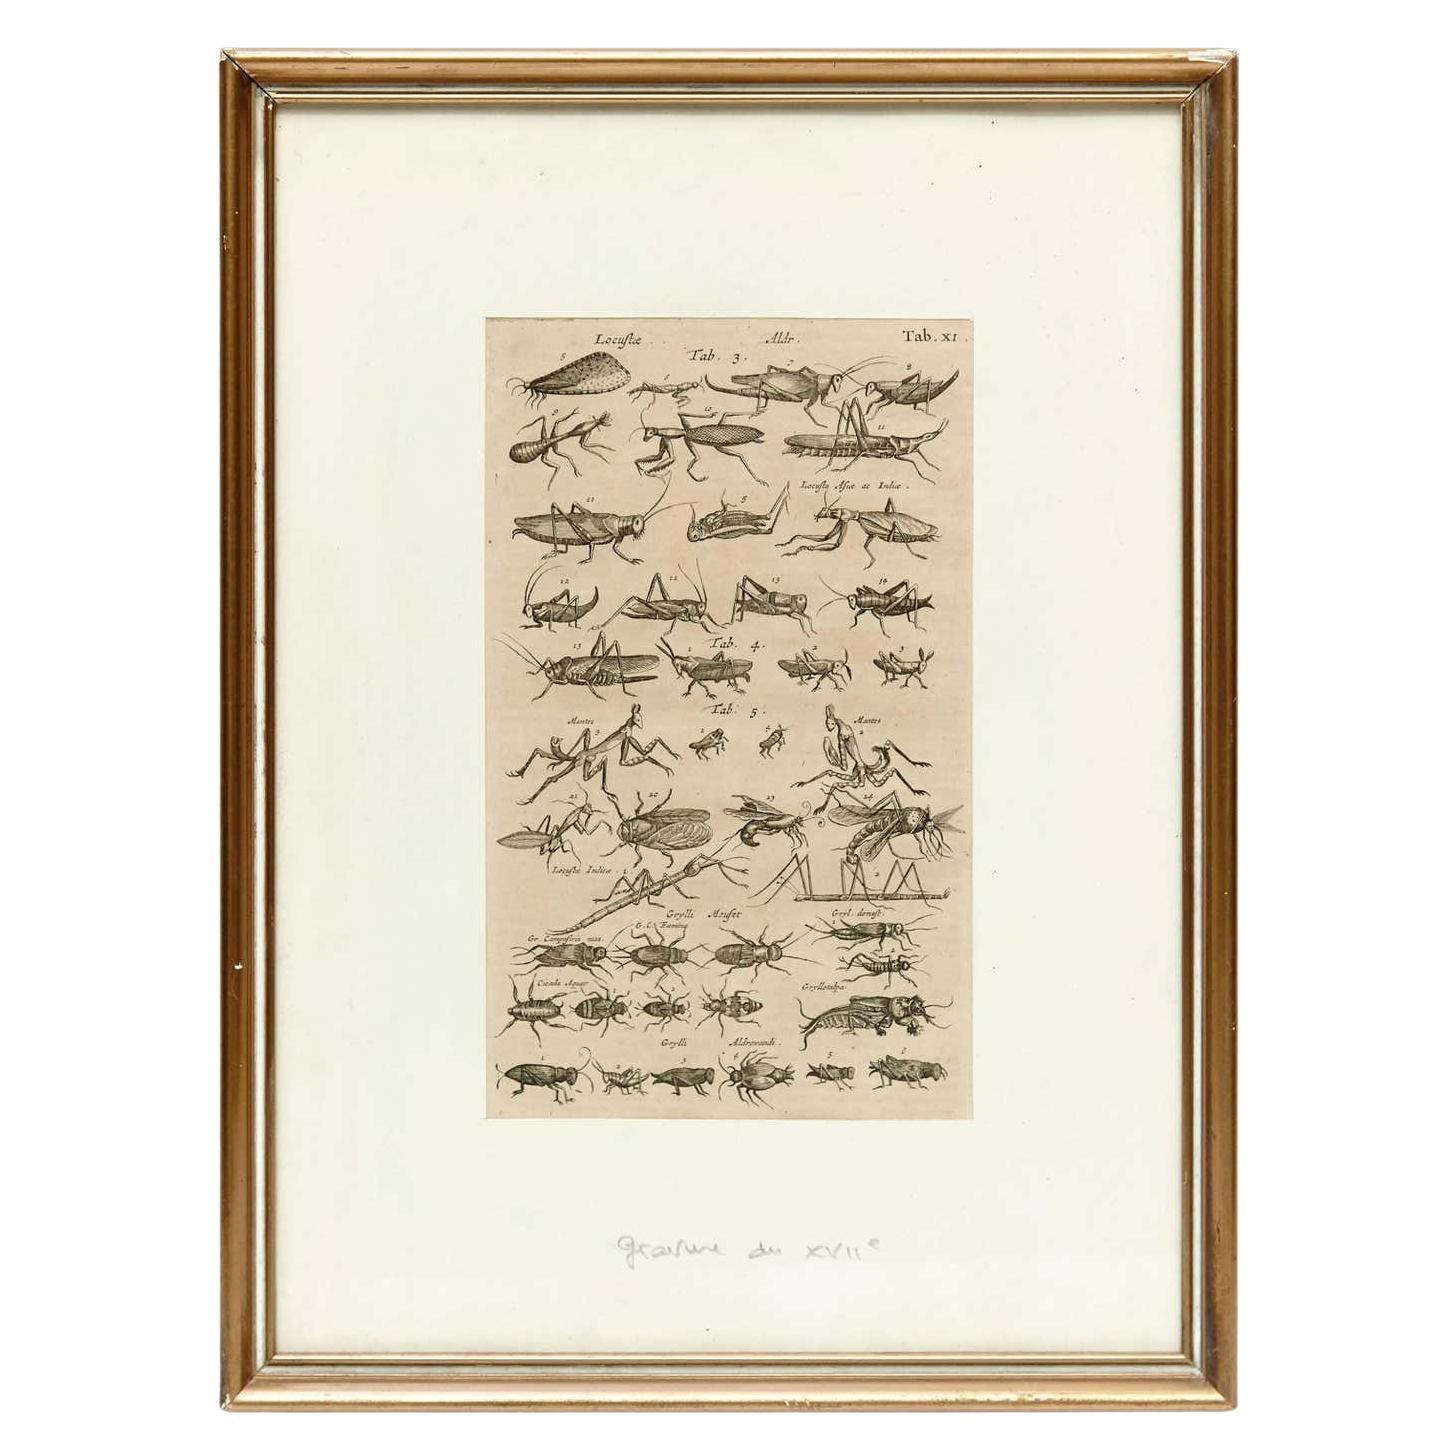 Early XXth Century French Engraving of Insects